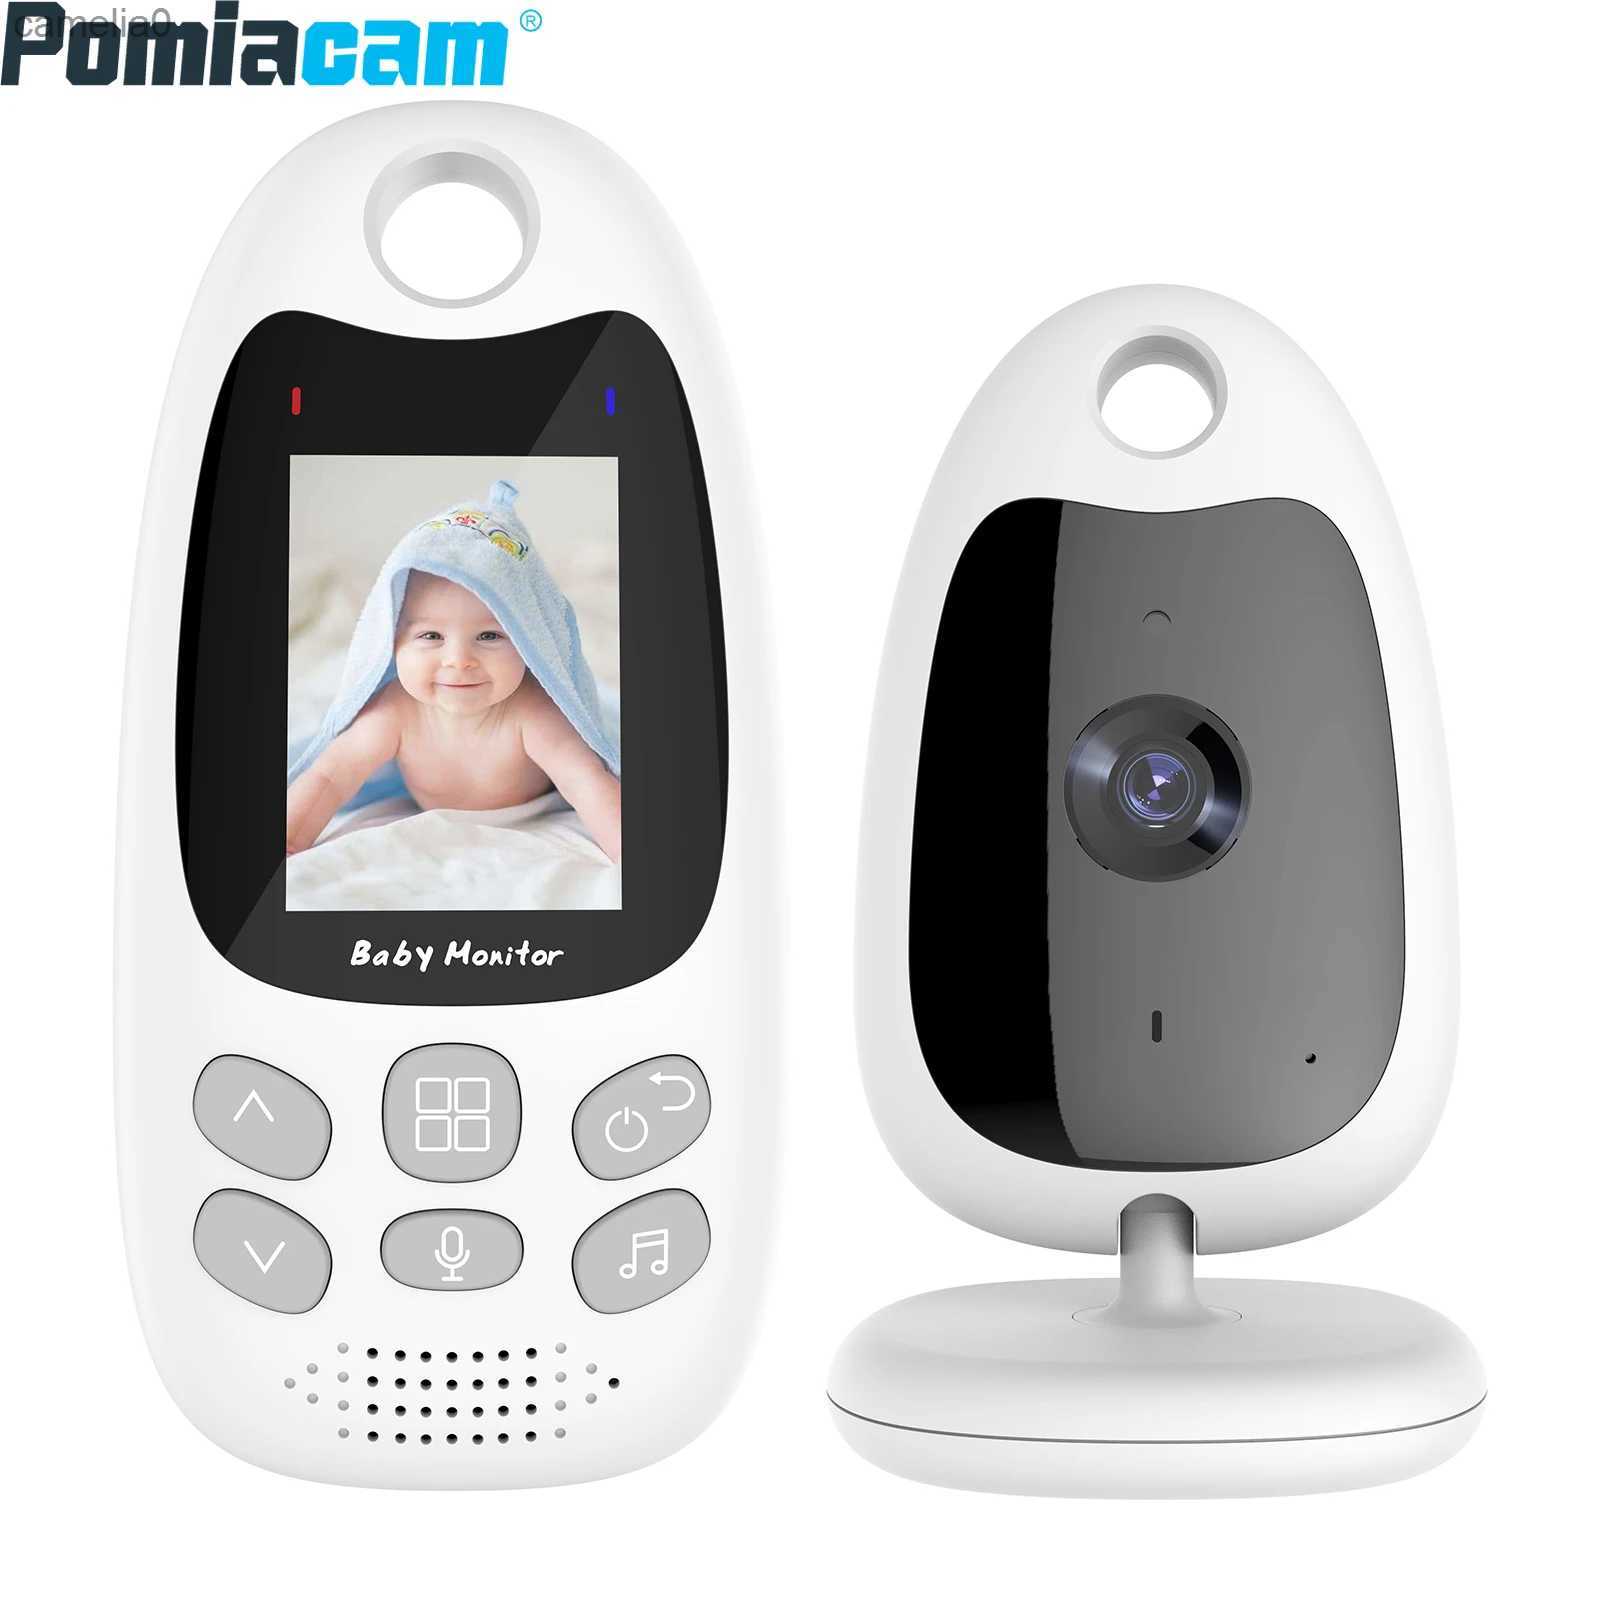 Baby Monitors Mini Video Baby Monitor med Automatic Night Vision Two-Way Audio Call Cry Alarm Energy Saving Lullaby Baby Room Camera Equipment VB610C240412